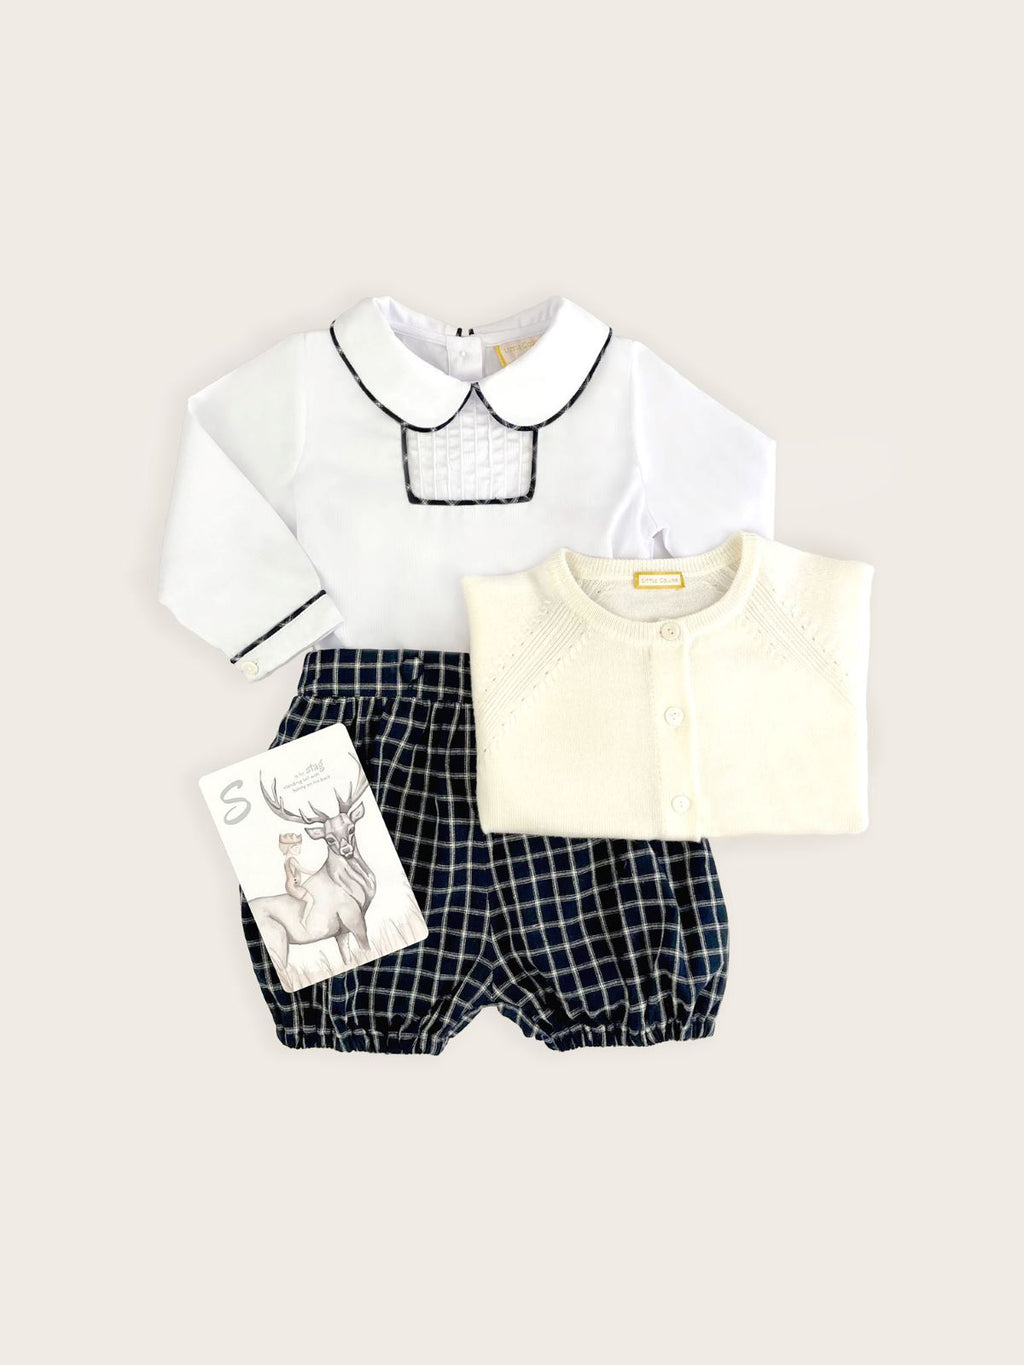 French navy check baby boy bloomers with a peter pan collared shirt featuring check piping 